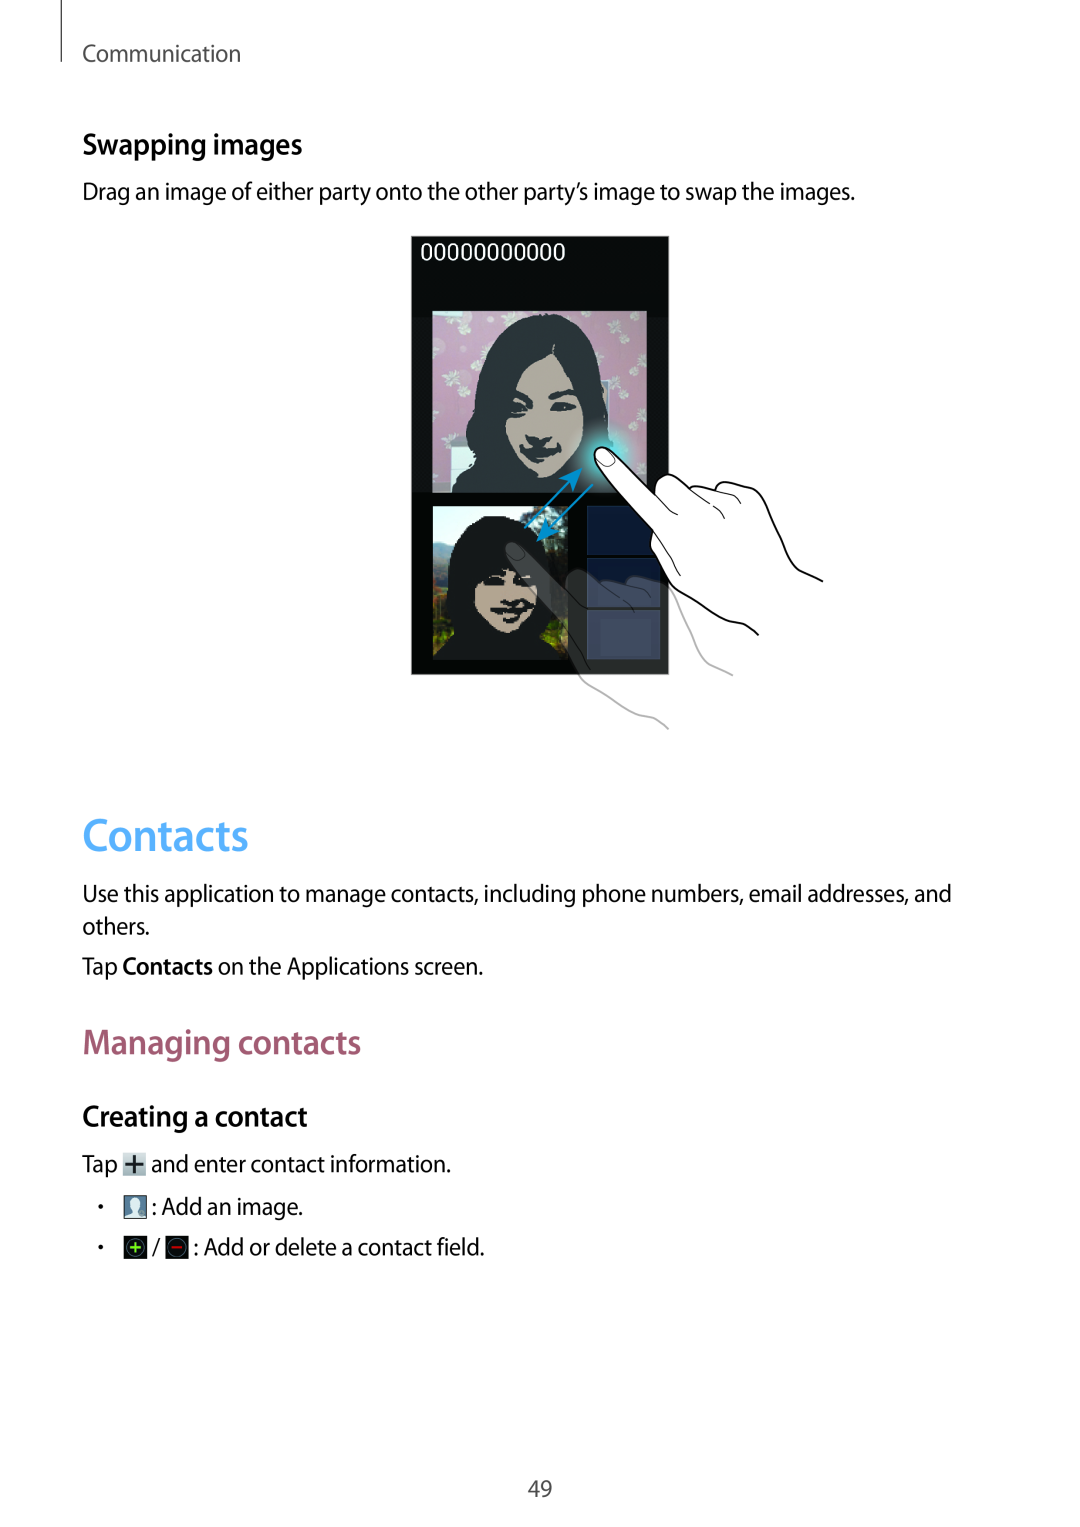 Samsung GT-I8190TANORS, GT-I8190RWNDTM Contacts, Managing contacts, Swapping images, Creating a contact, Communication 